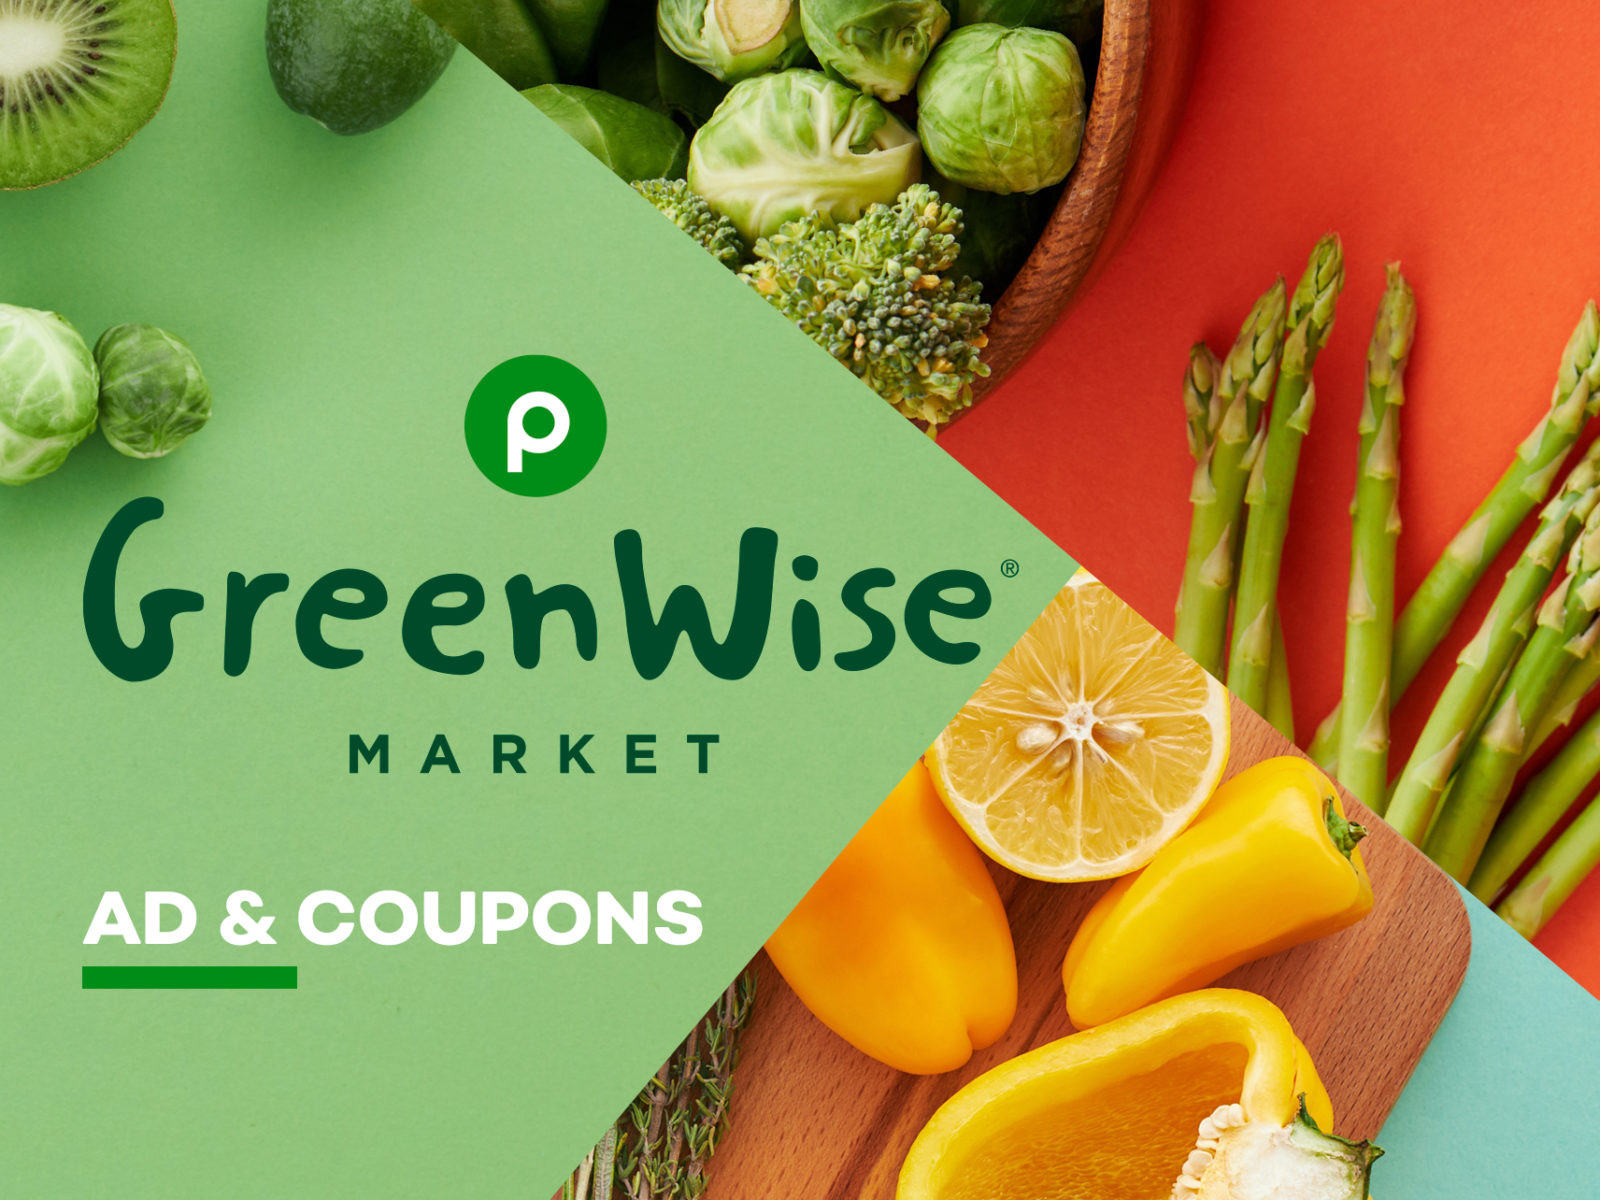 Publix GreenWise Market Ad & Coupons Week Of 11/17 to 11/23 (11/16 to 11/23 For Some)